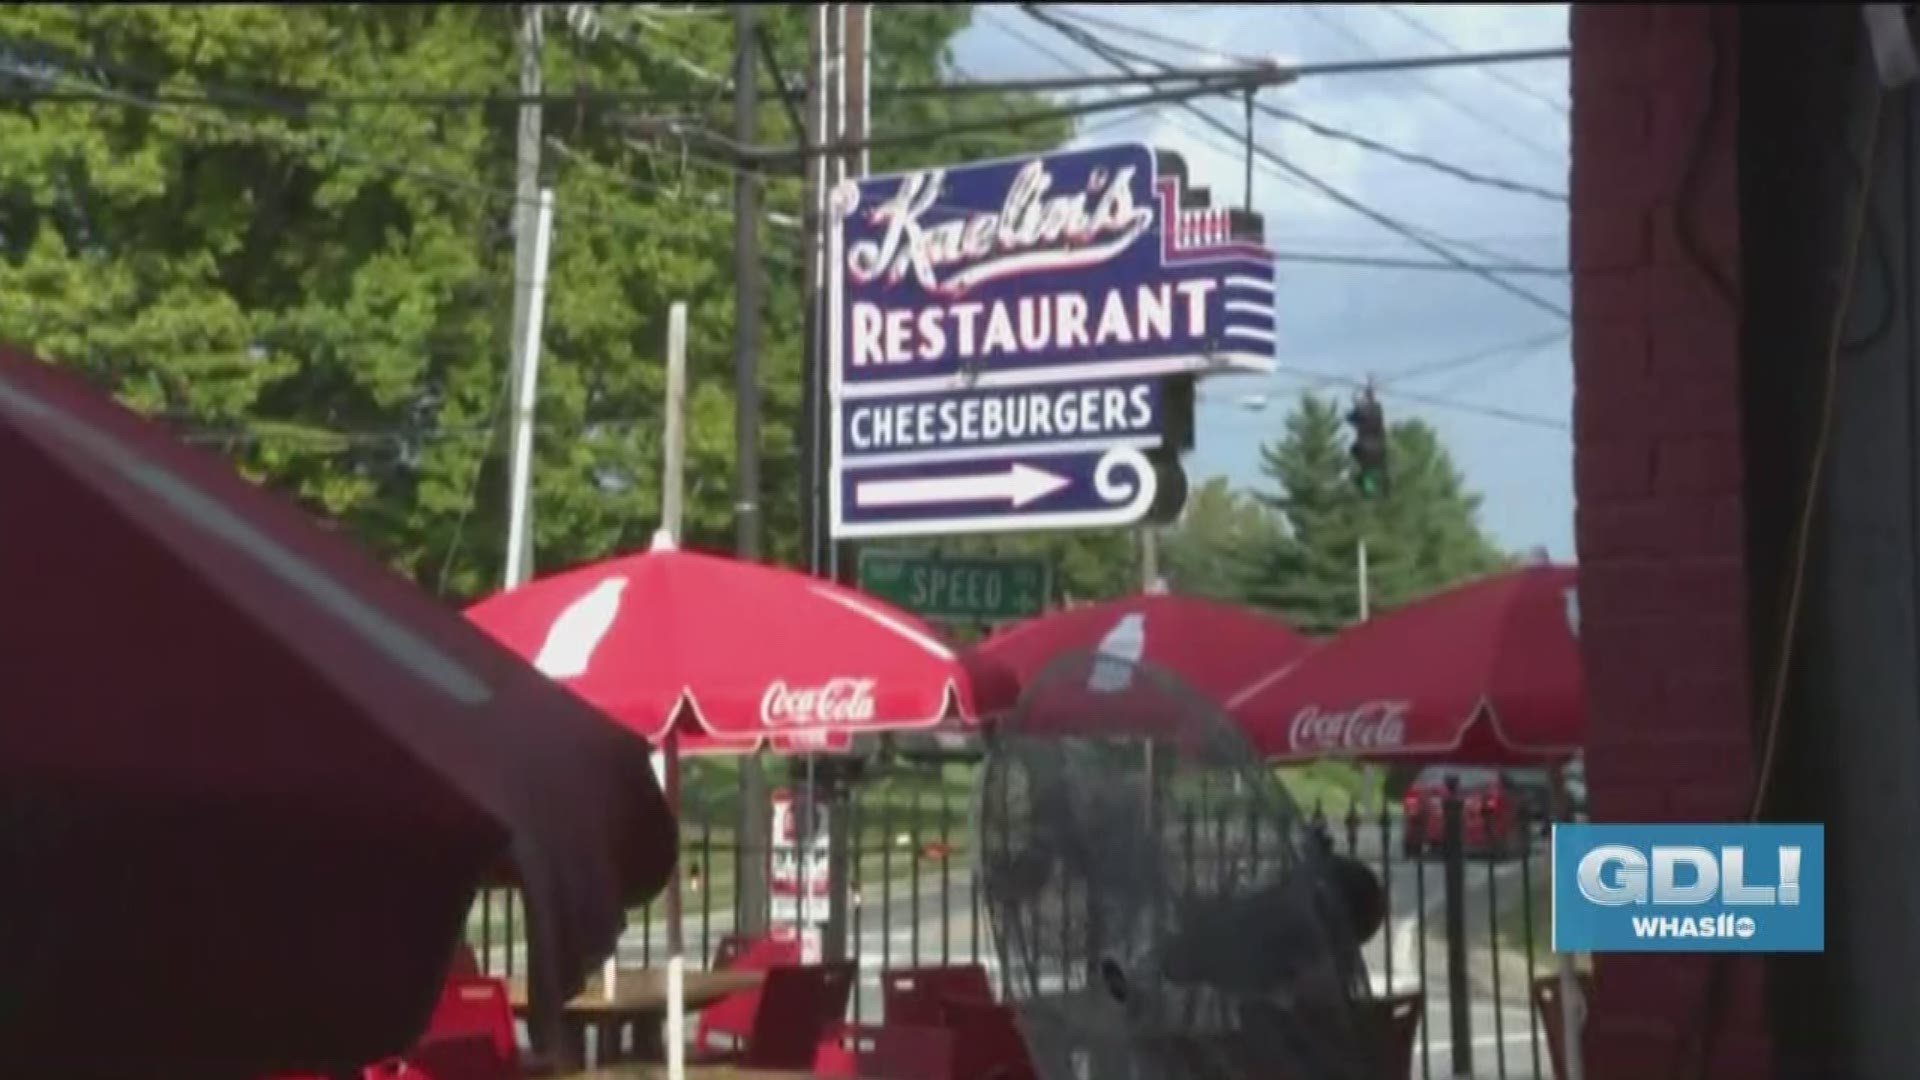 A Louisville landmark restaurant has a whole new look and menu upgrade. Not only is Kaelin's known as the "birthplace of the cheeseburger," but it was also the first business to serve Kentucky Fried Chicken.